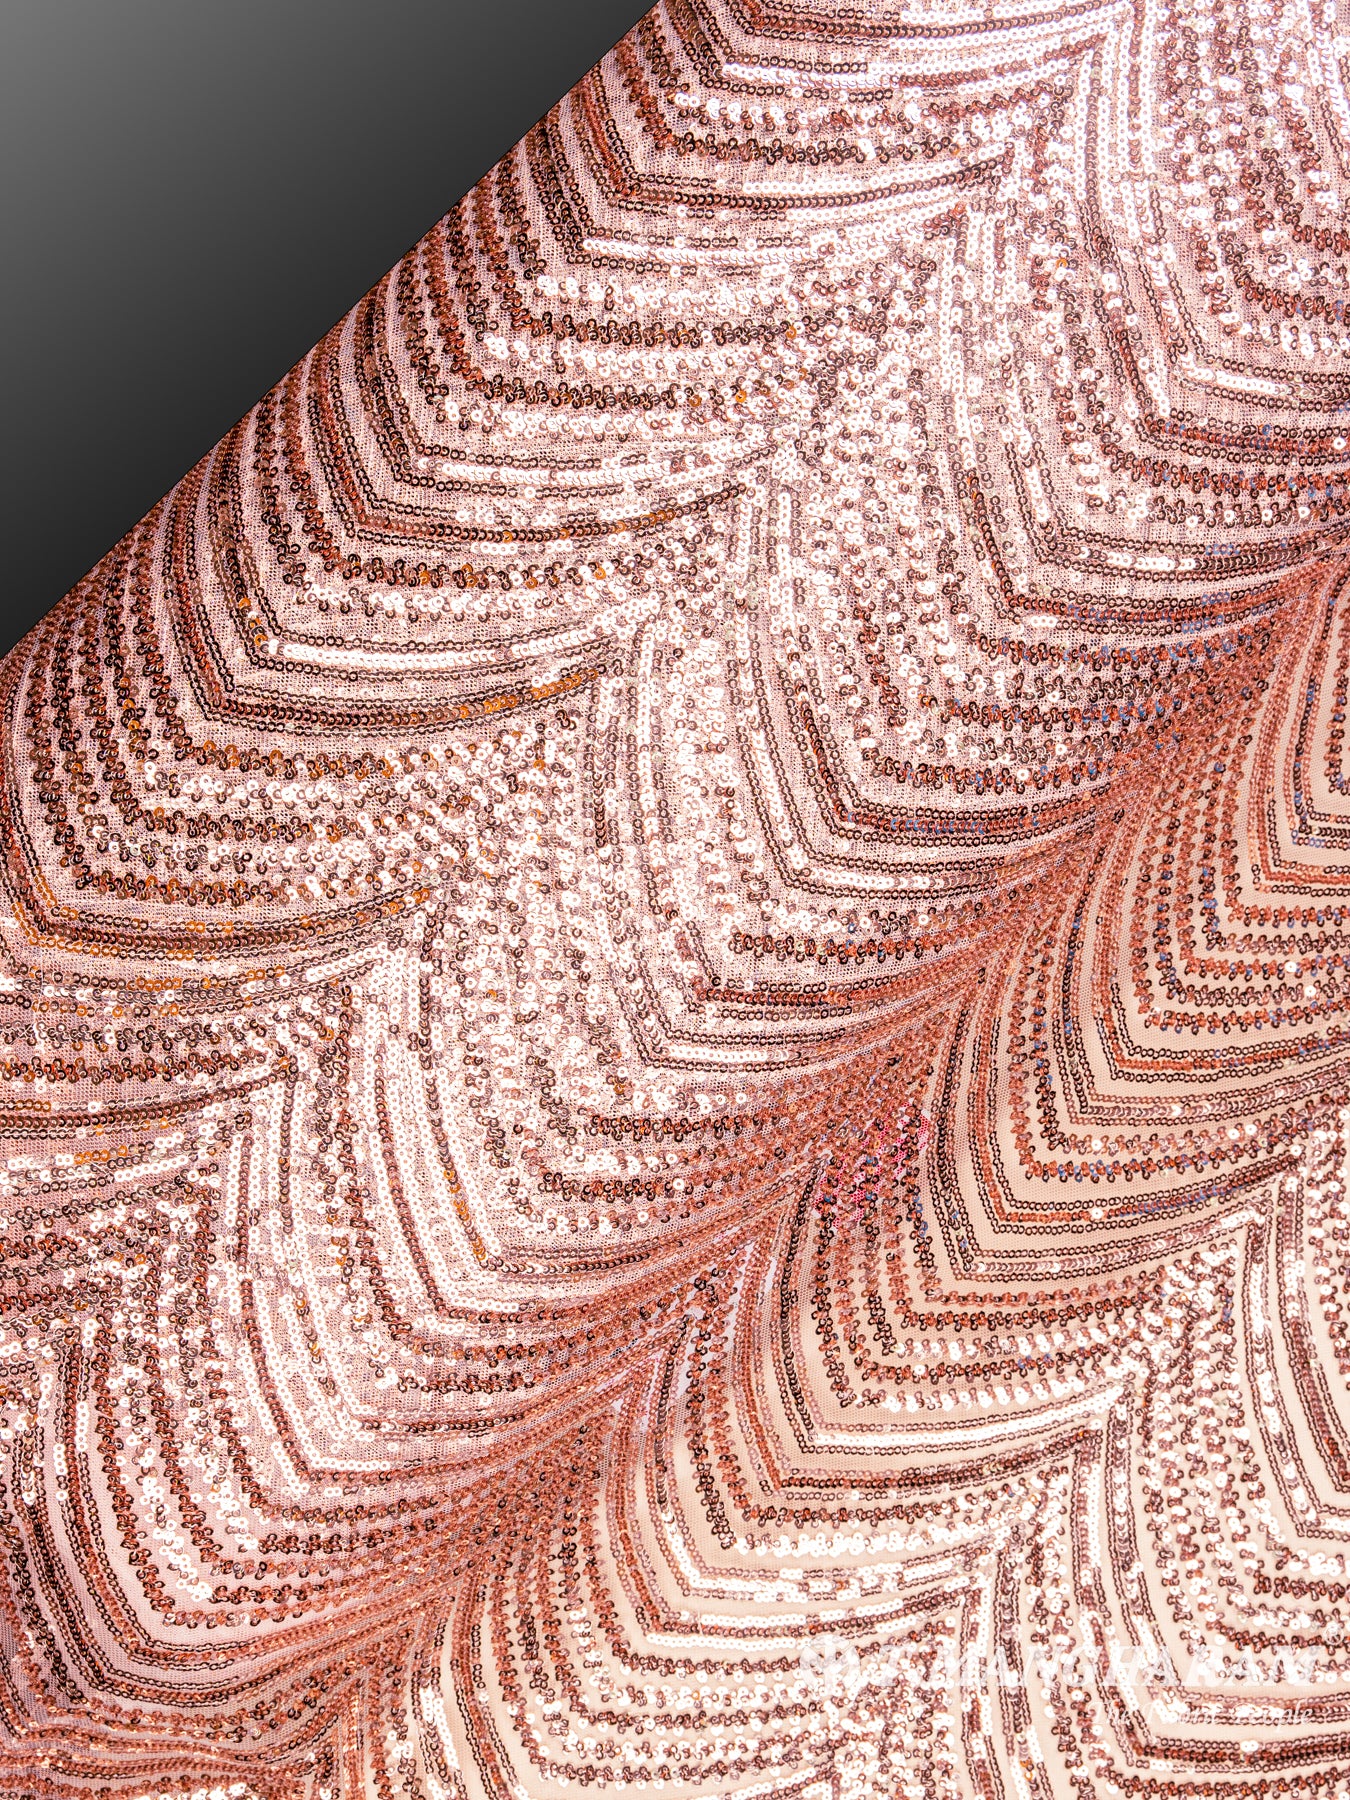 Rose Gold Sequin Net Fabric - EA1668 view-2